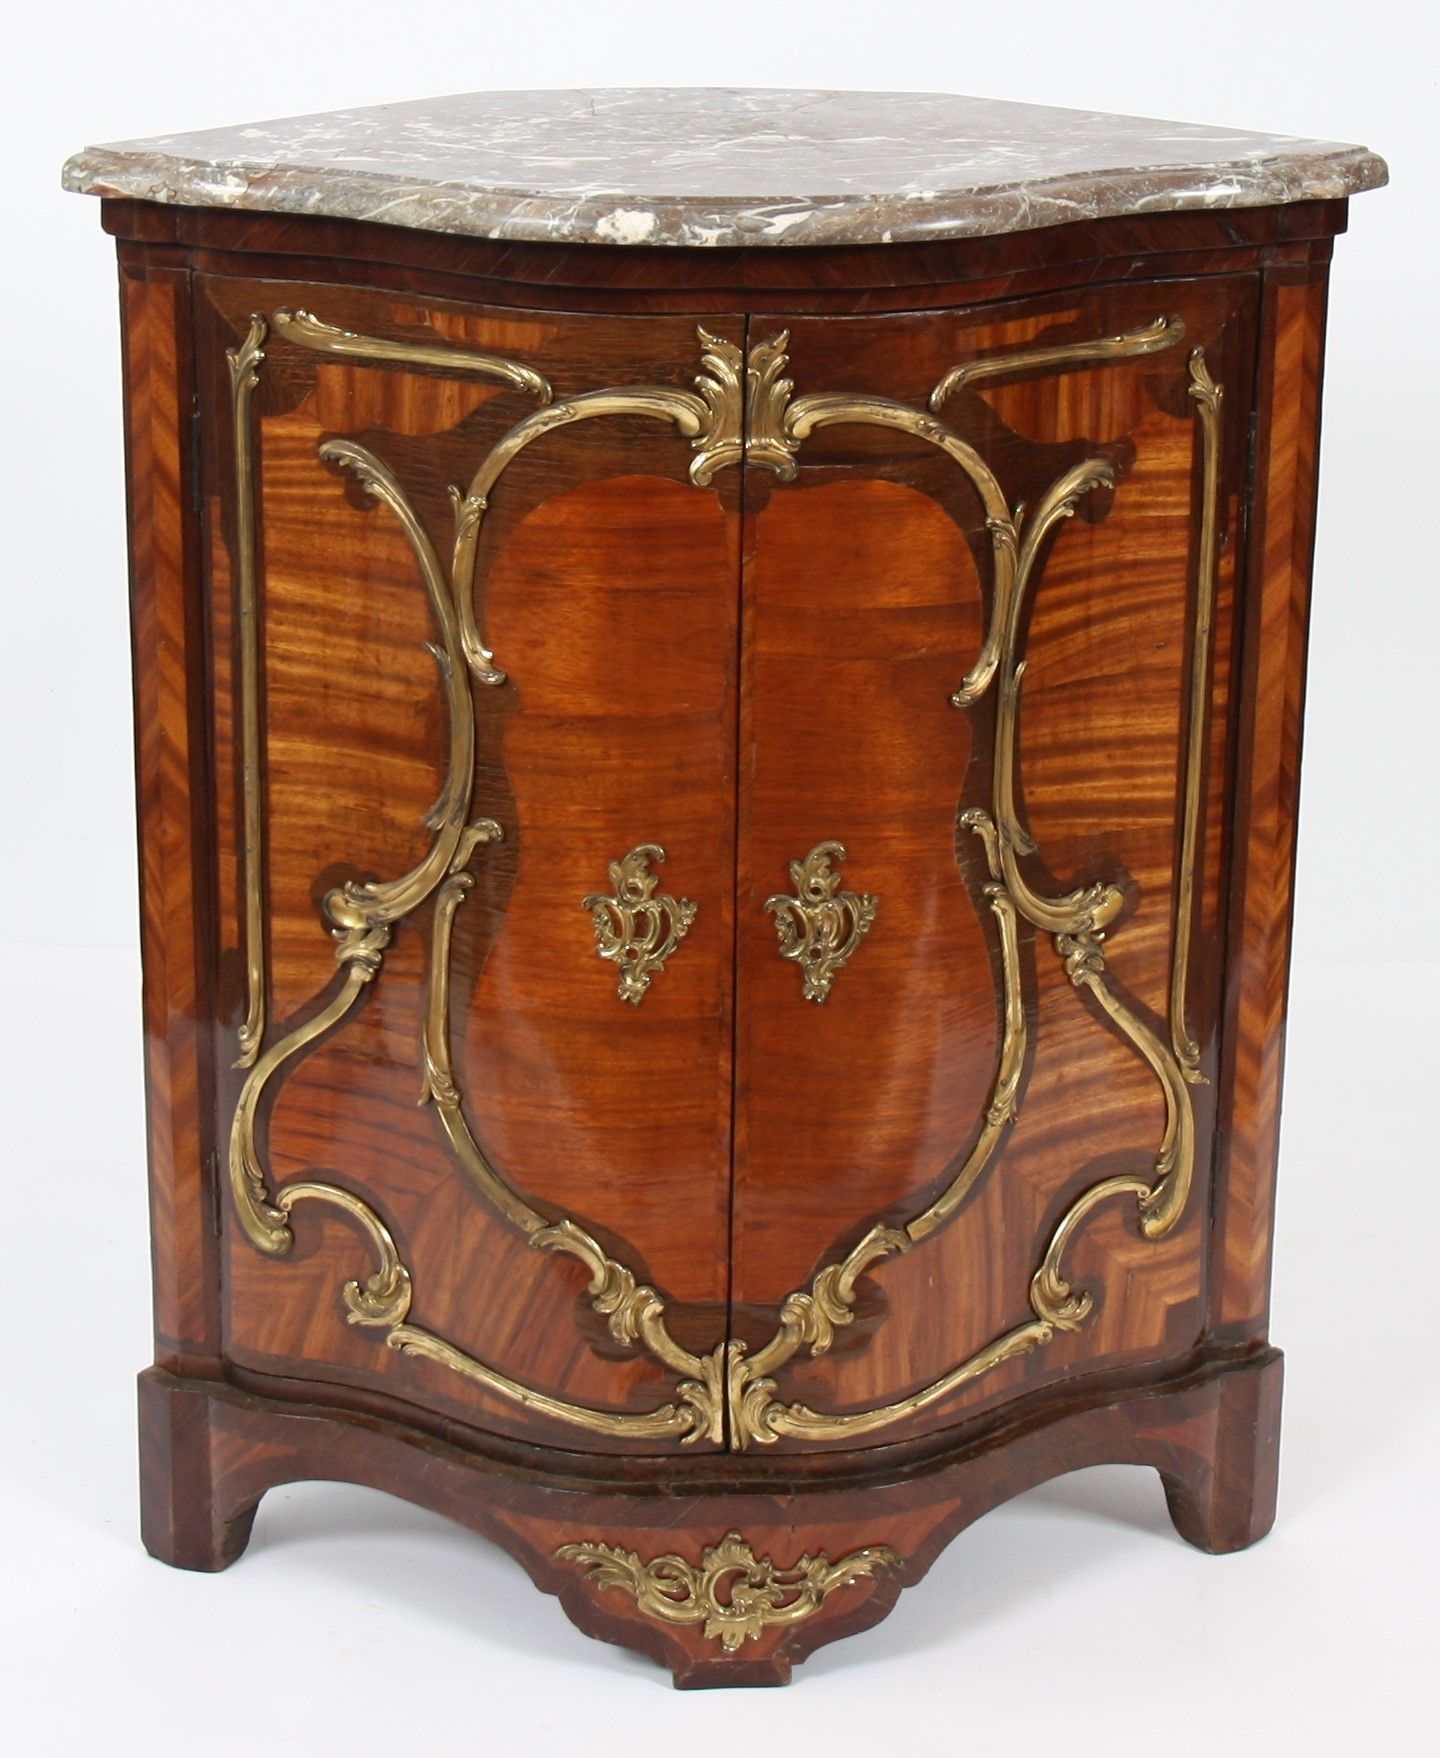 Null VERY NICE REGENCE MARQUET CHEST attributed to MIGEON

In marquetry of wood &hellip;